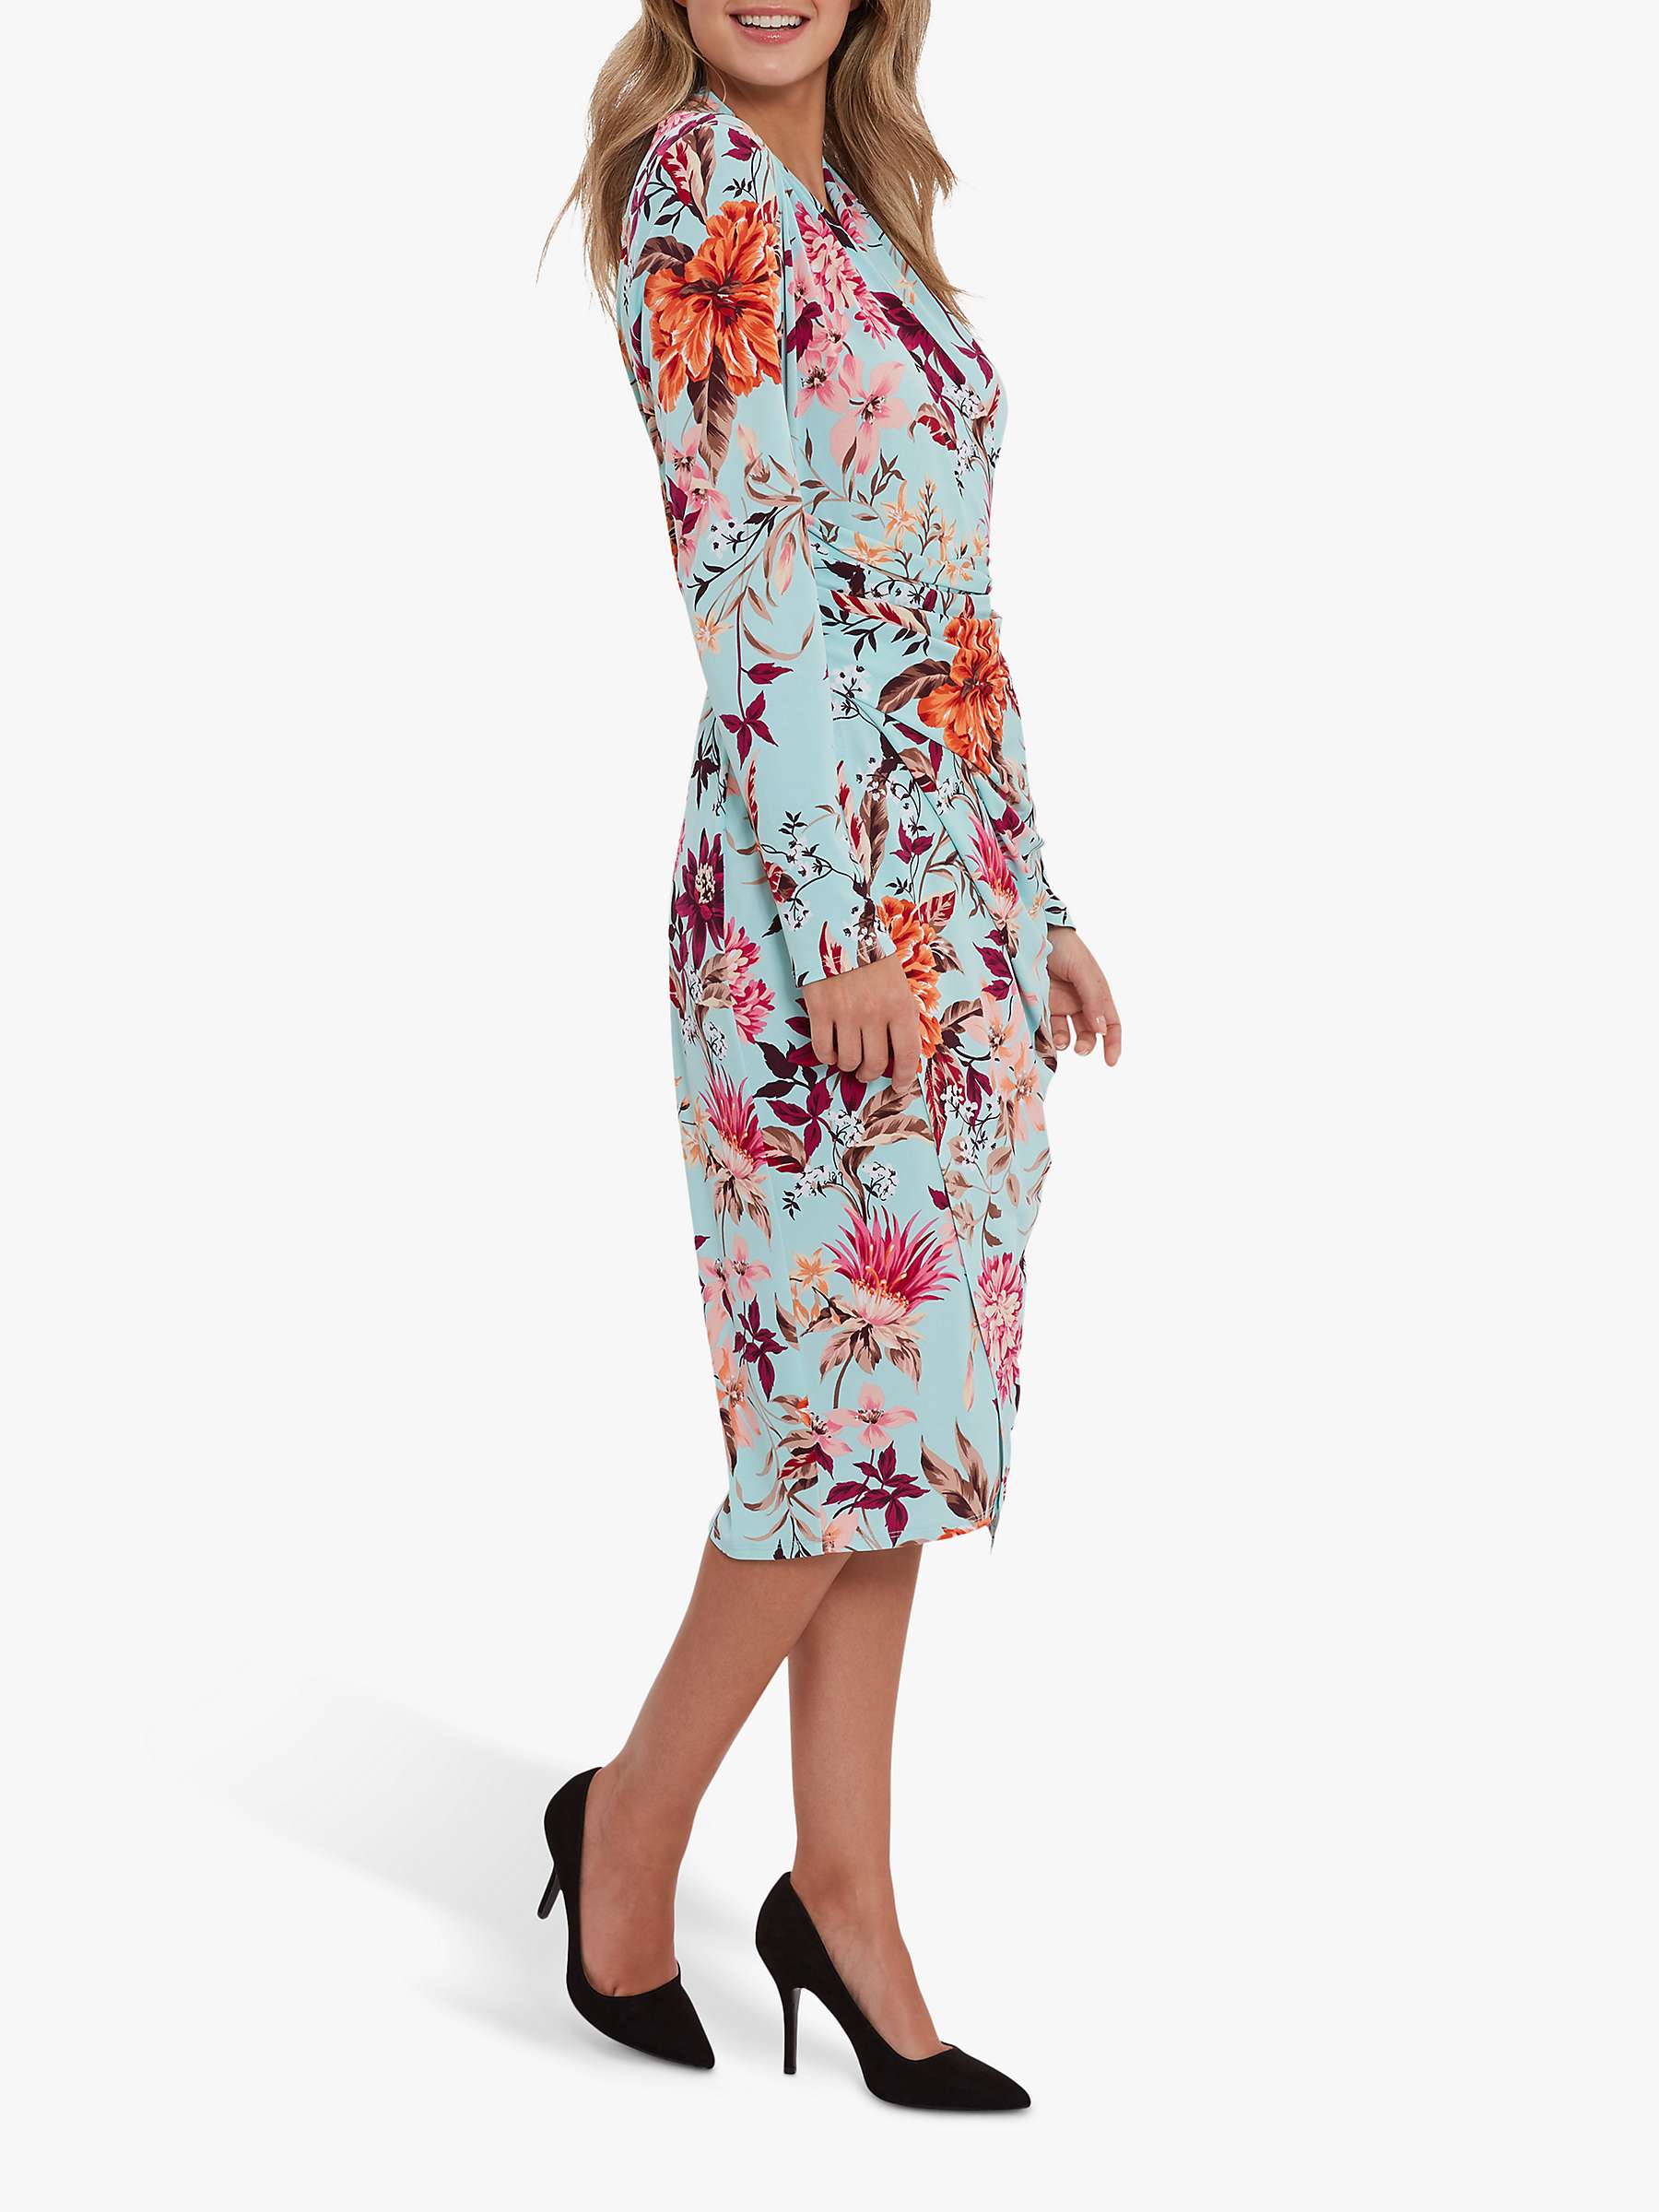 Buy Gina Bacconi Corriana Floral Midi Dress, Turquoise Online at johnlewis.com